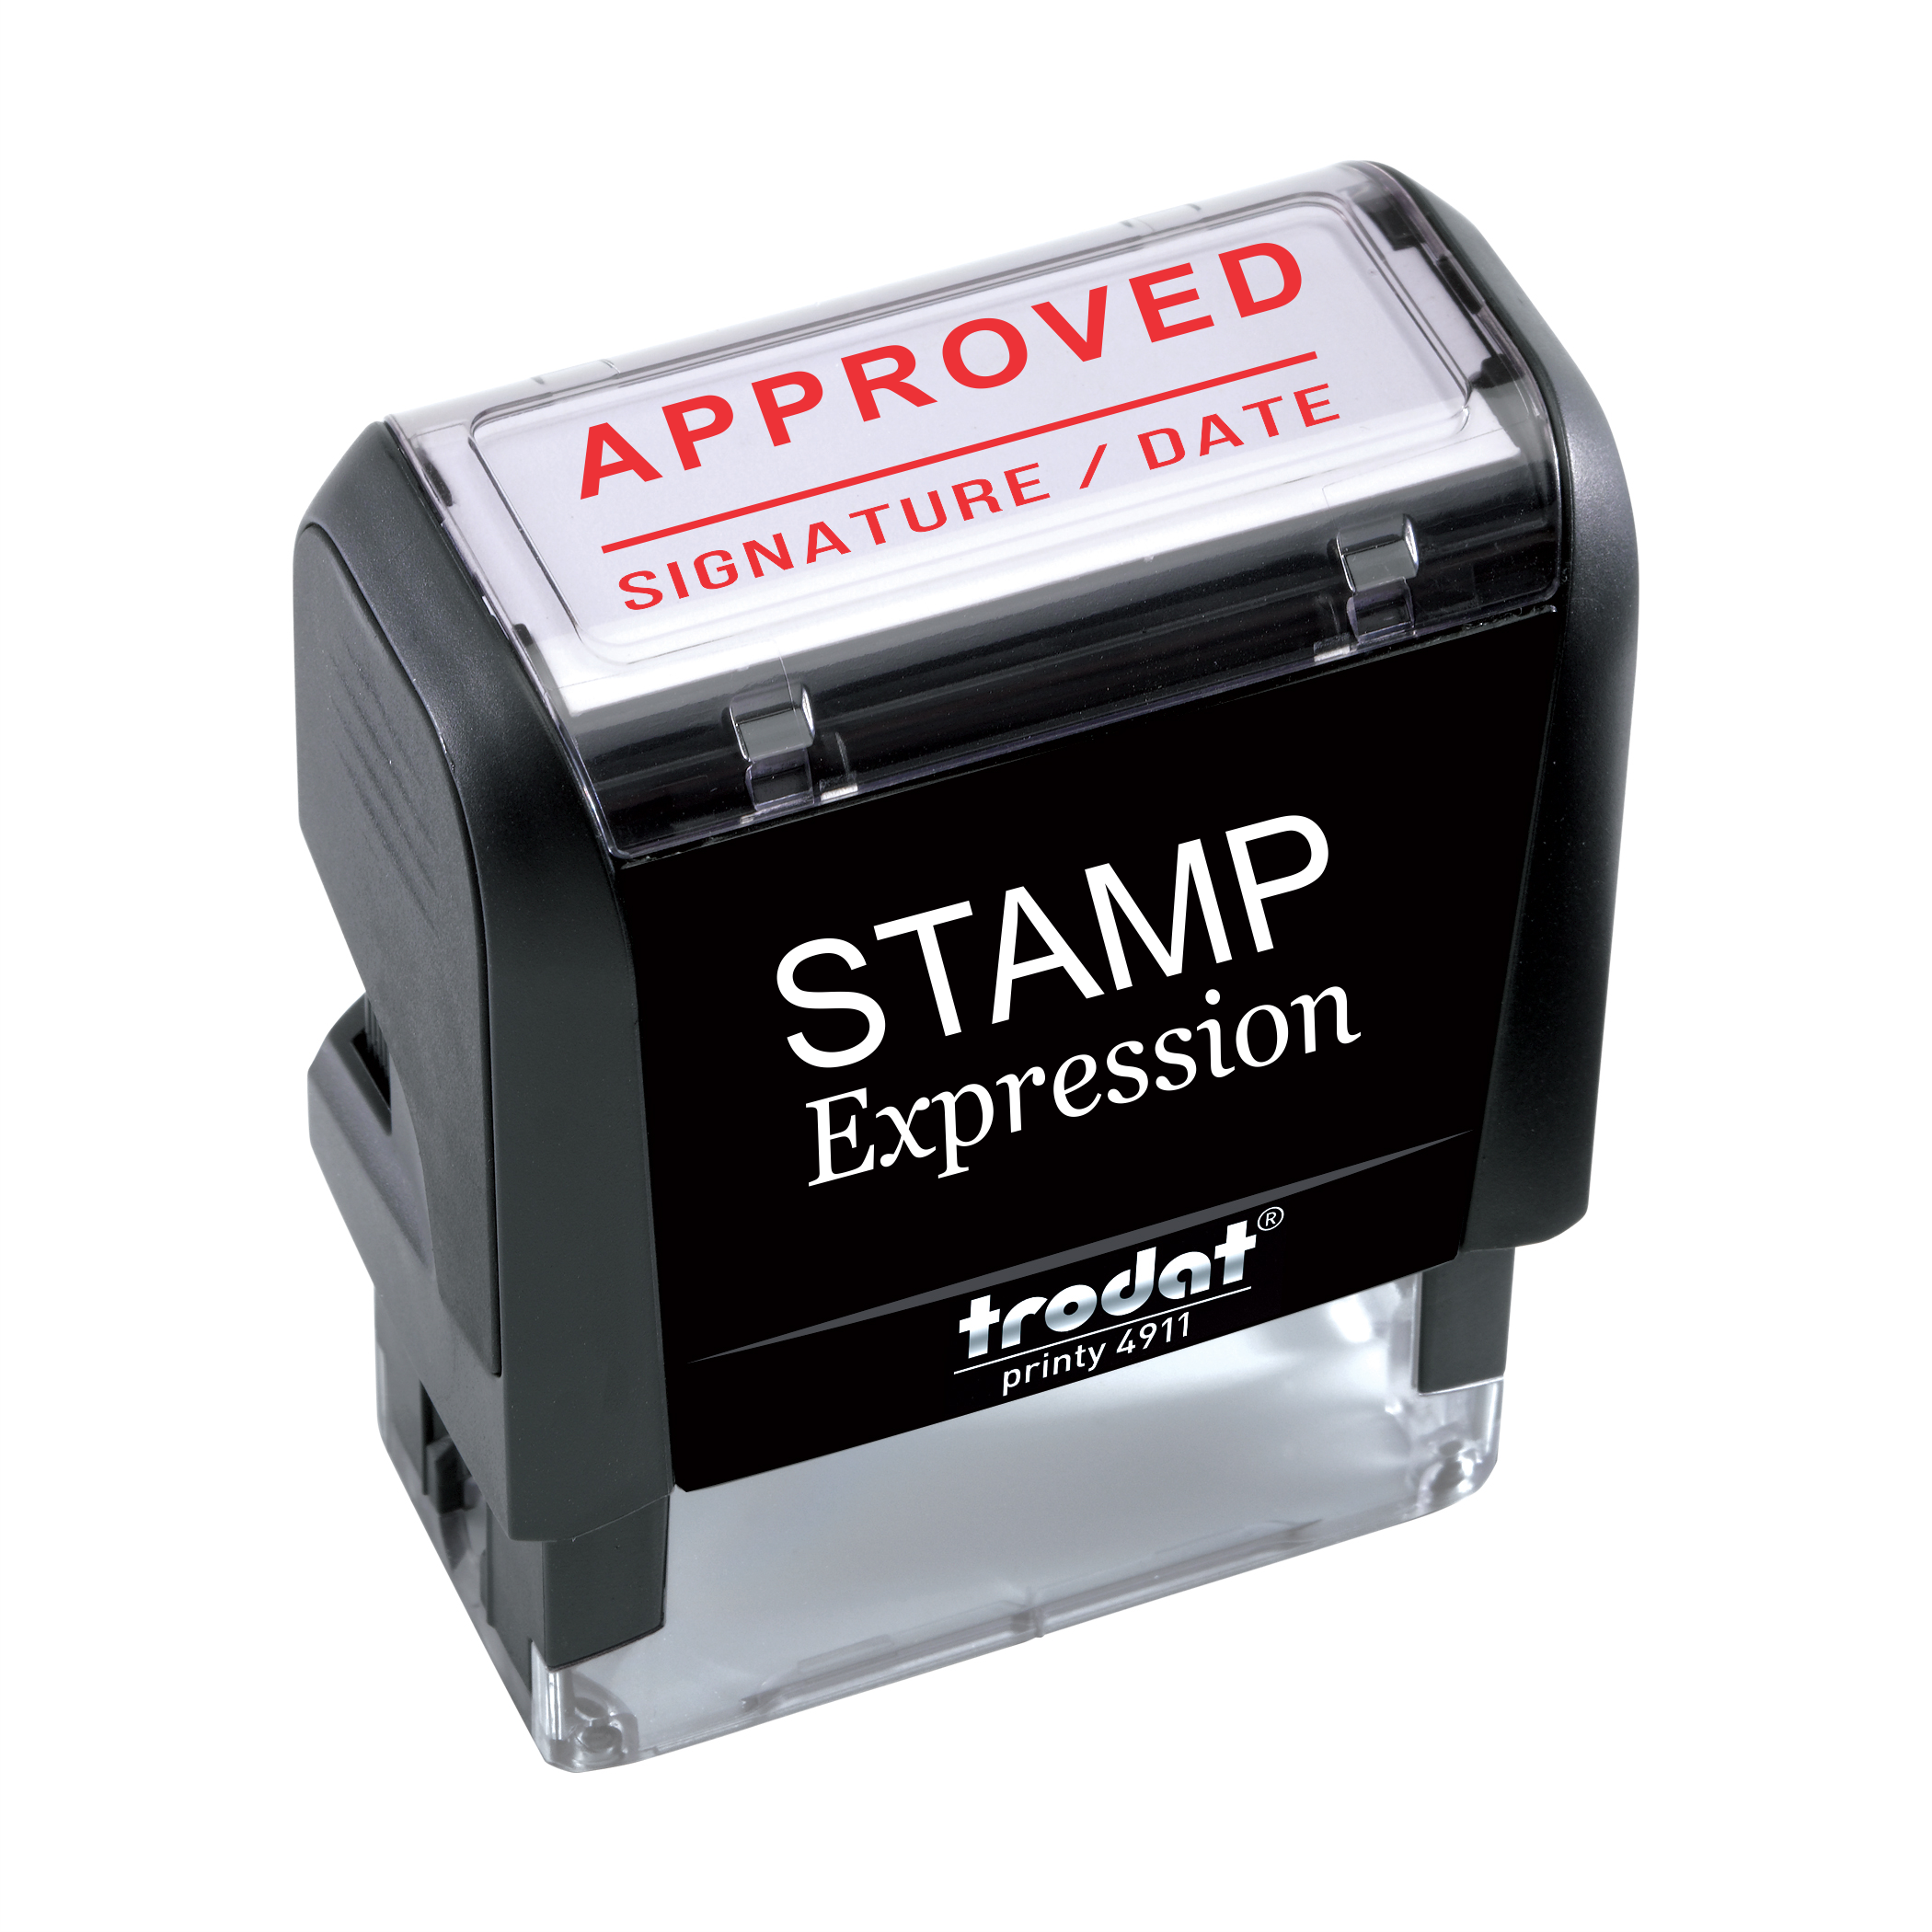 Approved Signature and Date with Line Office Self Inking Rubber Stamp